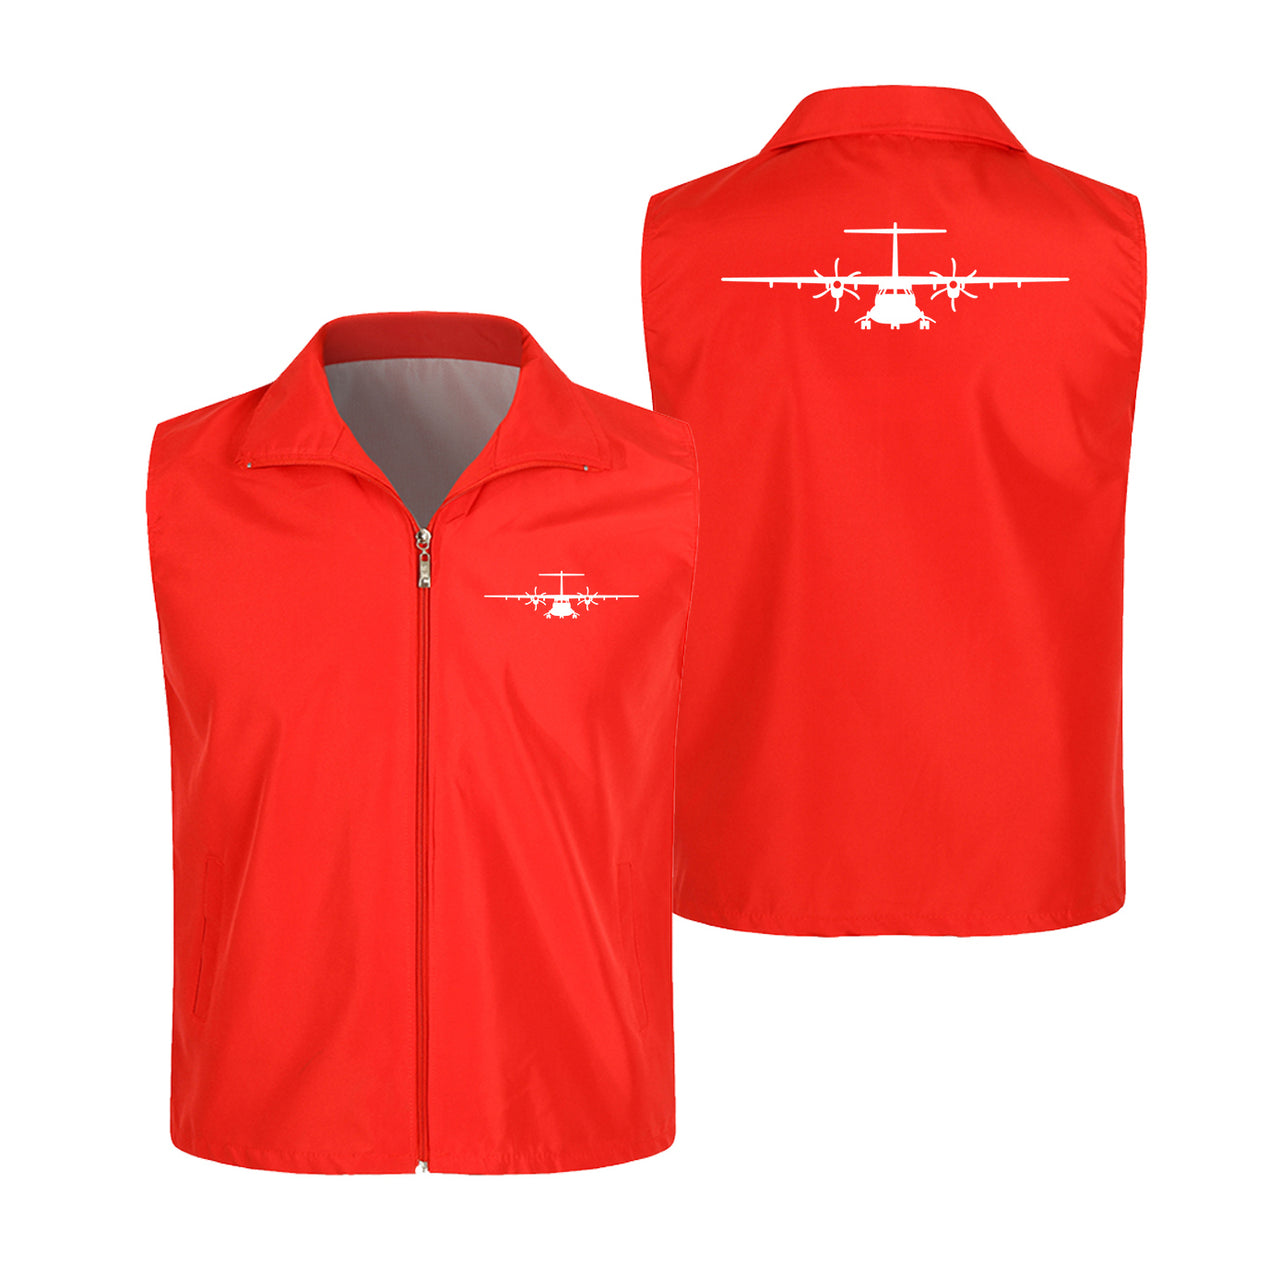 ATR-72 Silhouette Designed Thin Style Vests